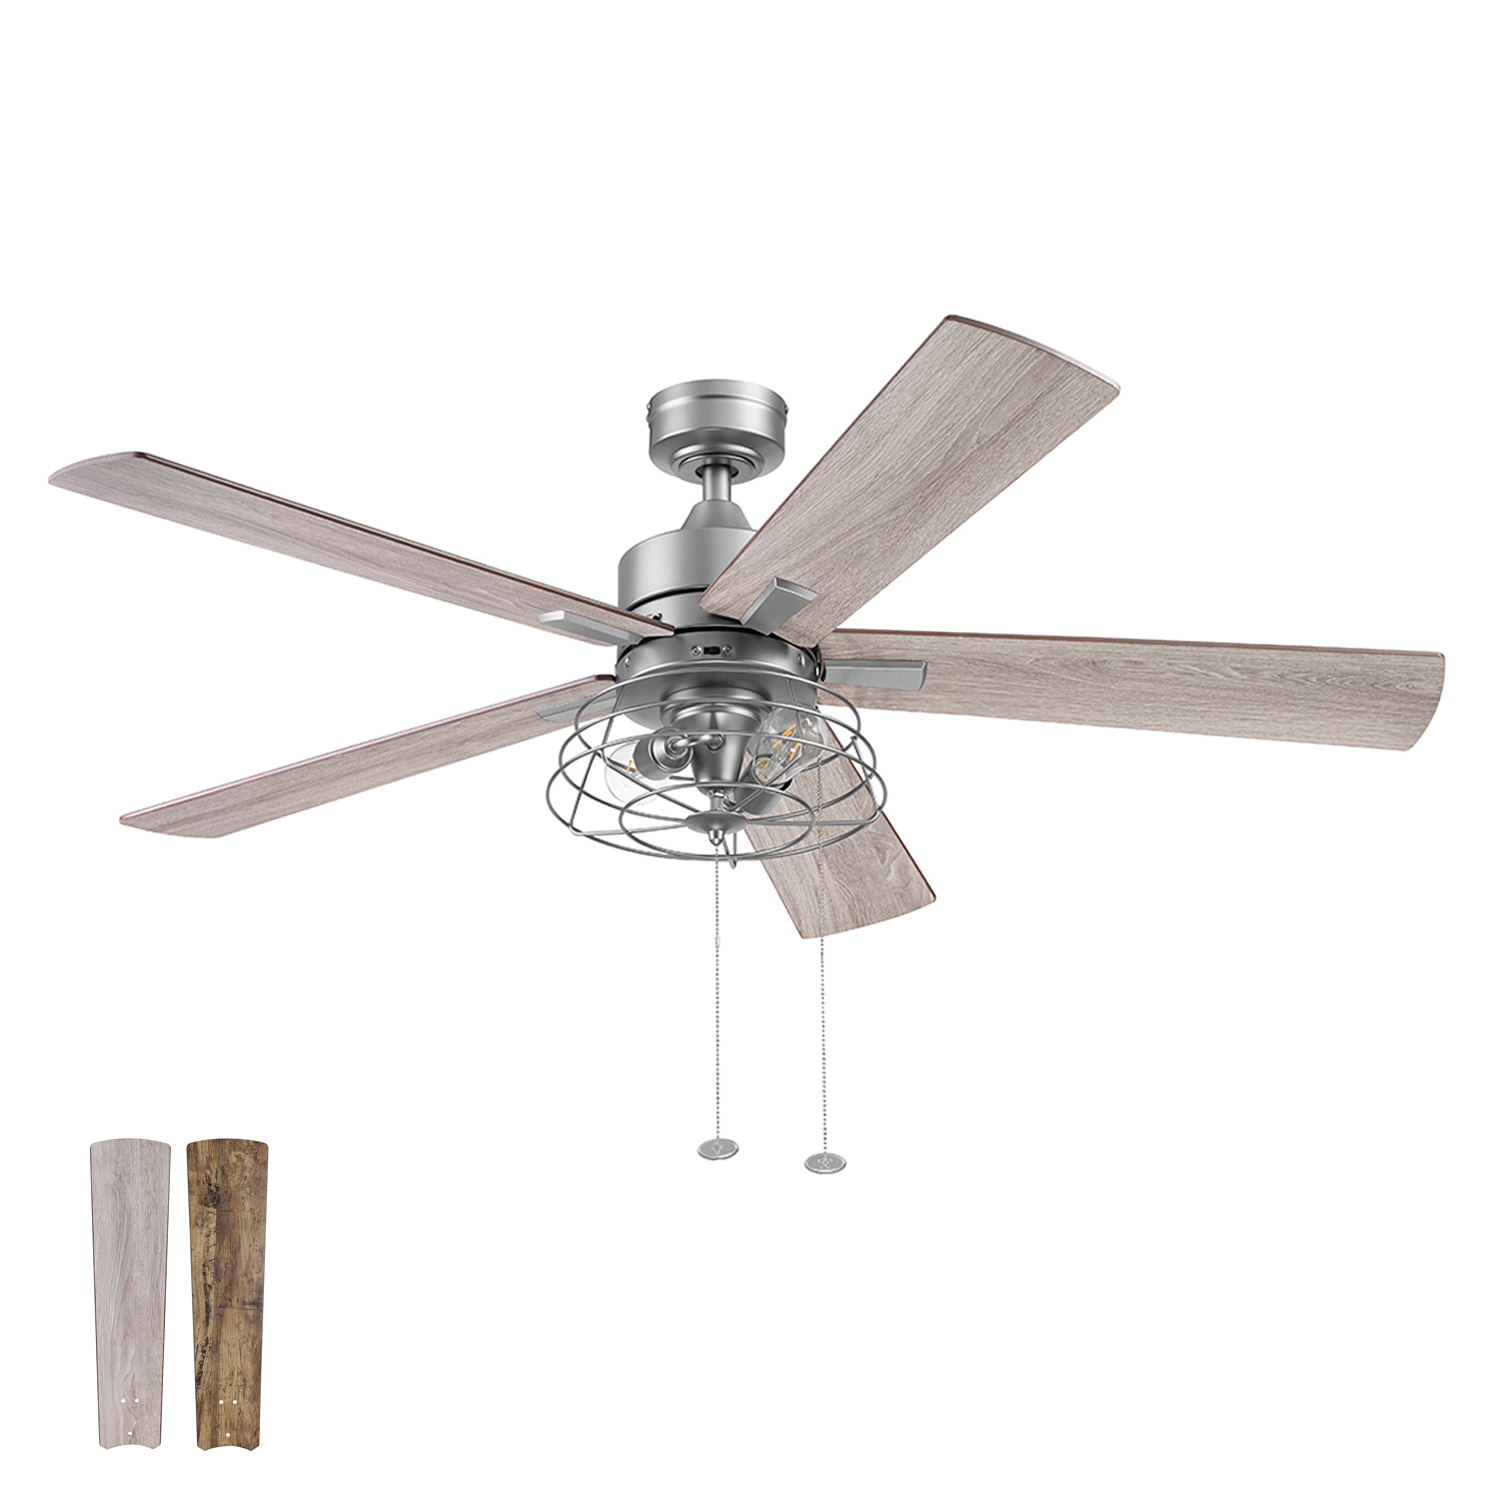 52 Inch Marshall, Pewter, Pull Chain, Ceiling Fan by Prominence Home